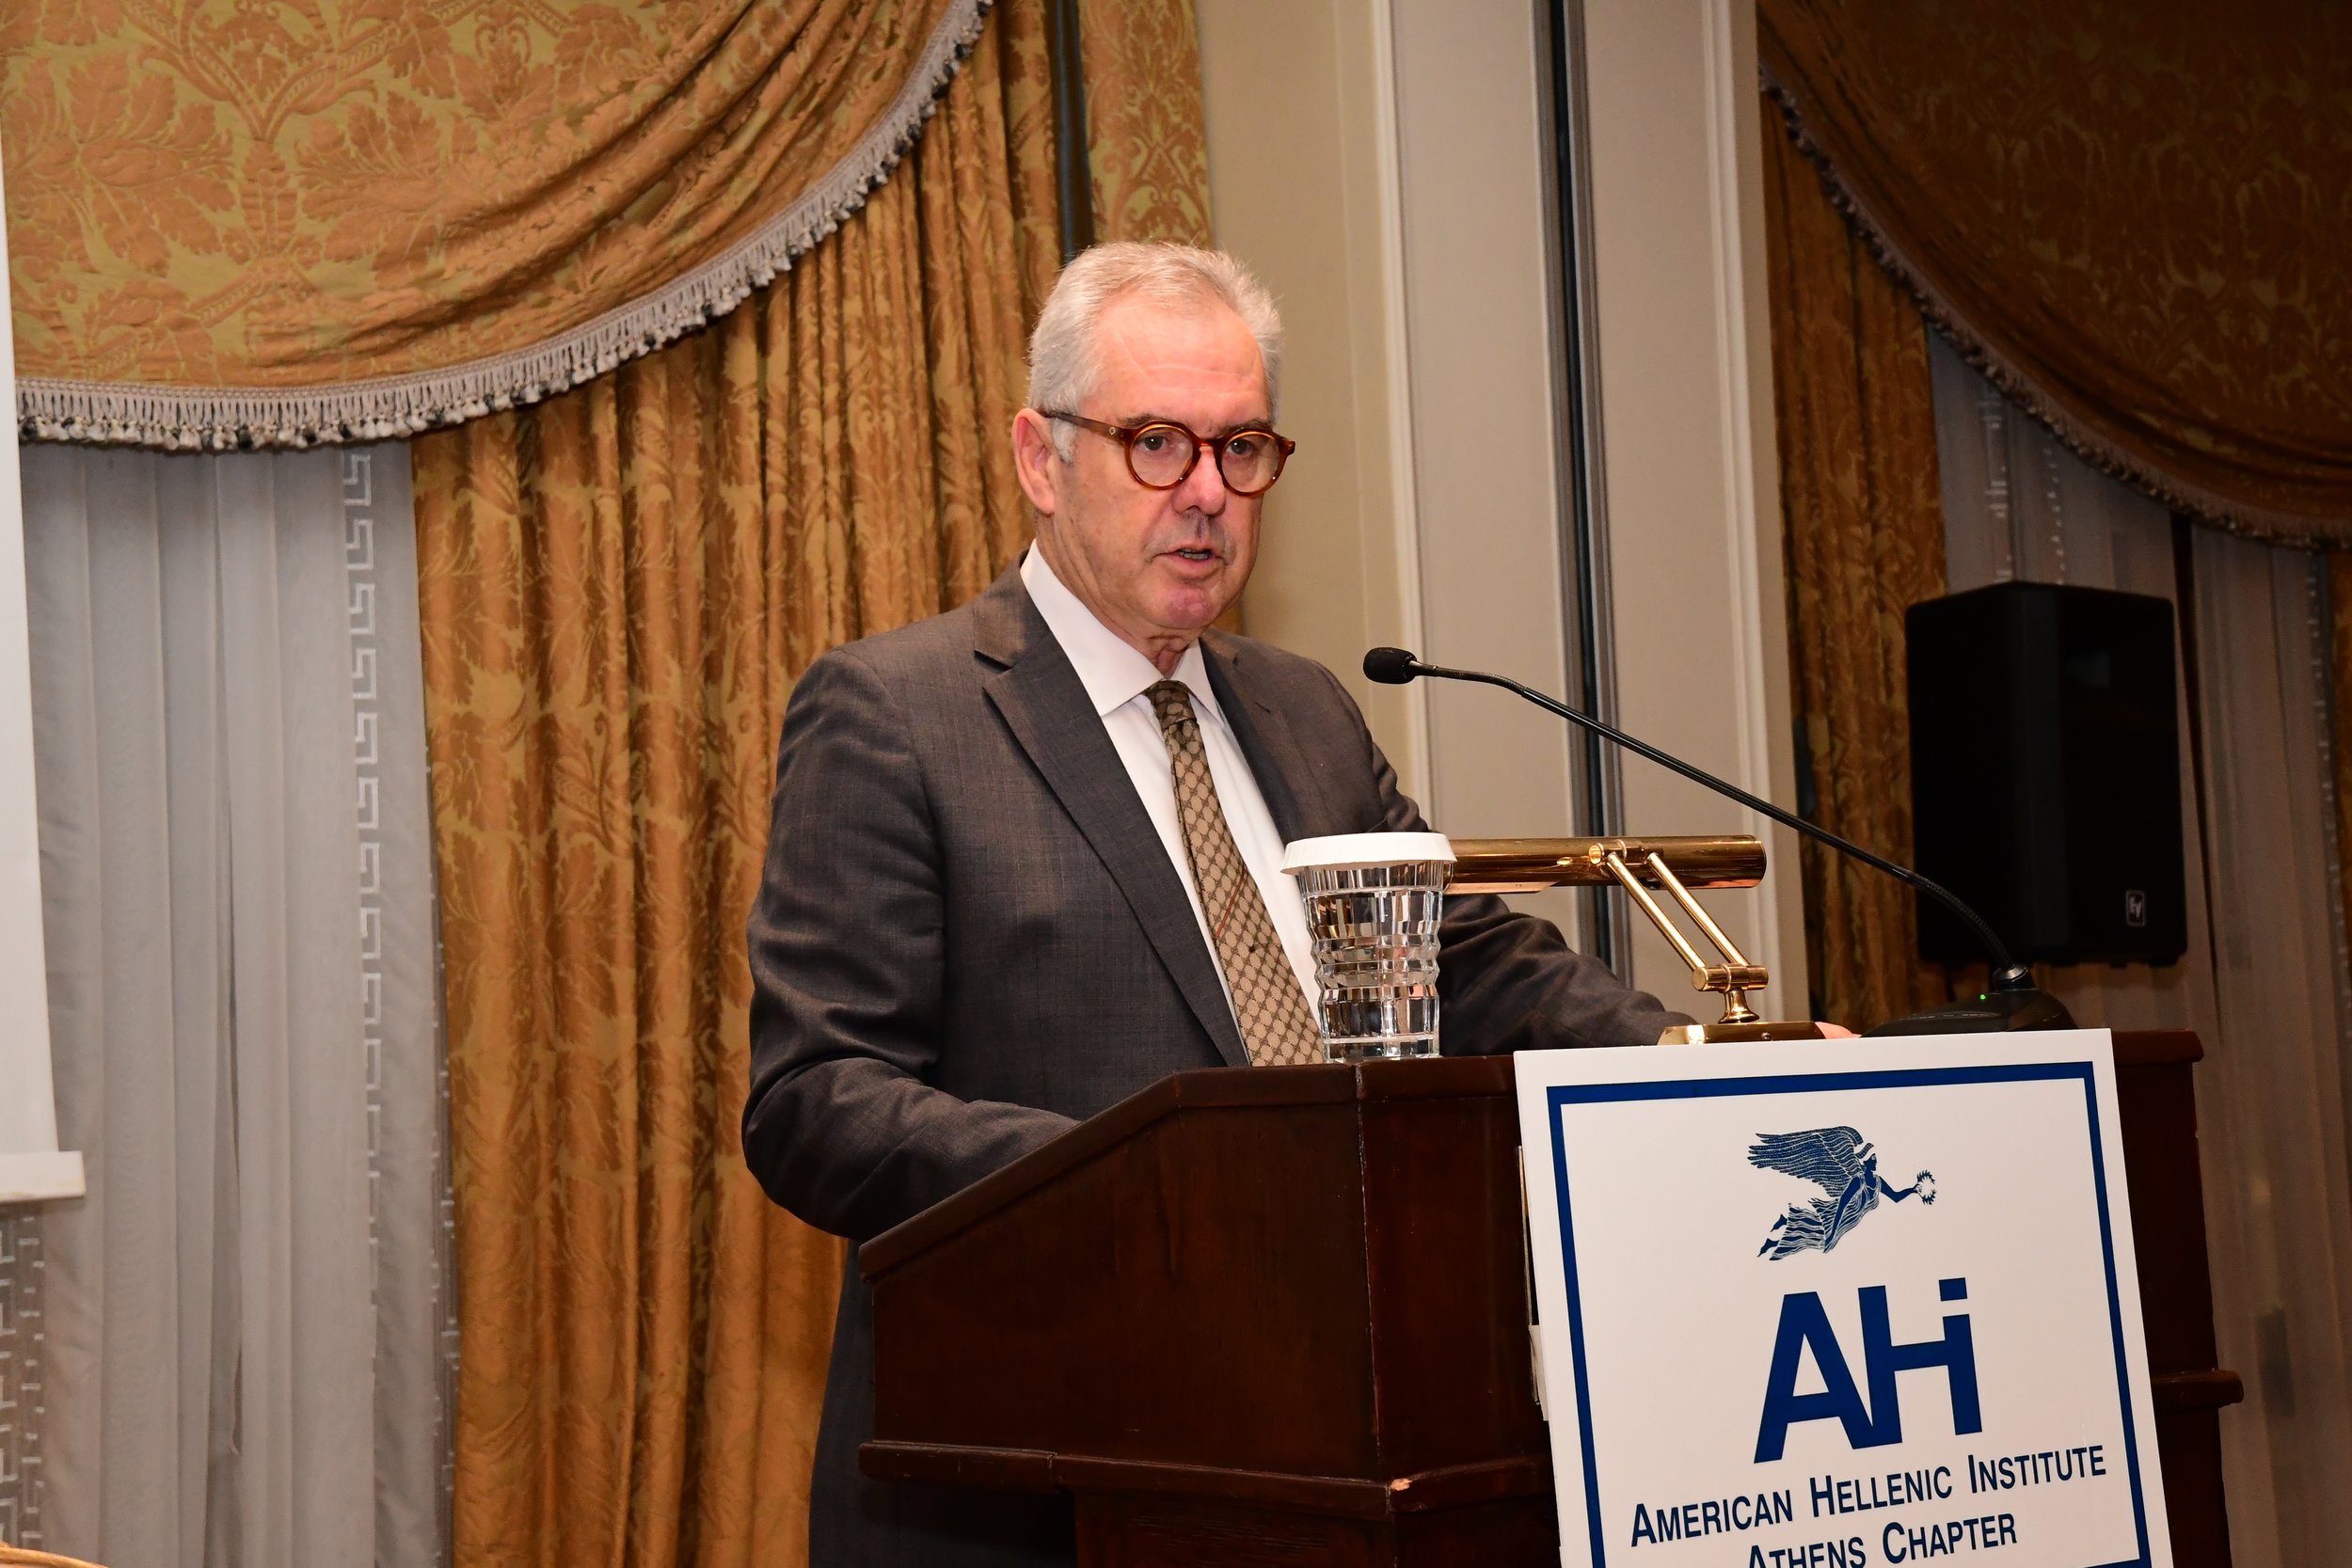  Vice Admiral Vasileios Kyriazis (ret.) H.N., President of AHI Athens Chapter welcoming the guests 